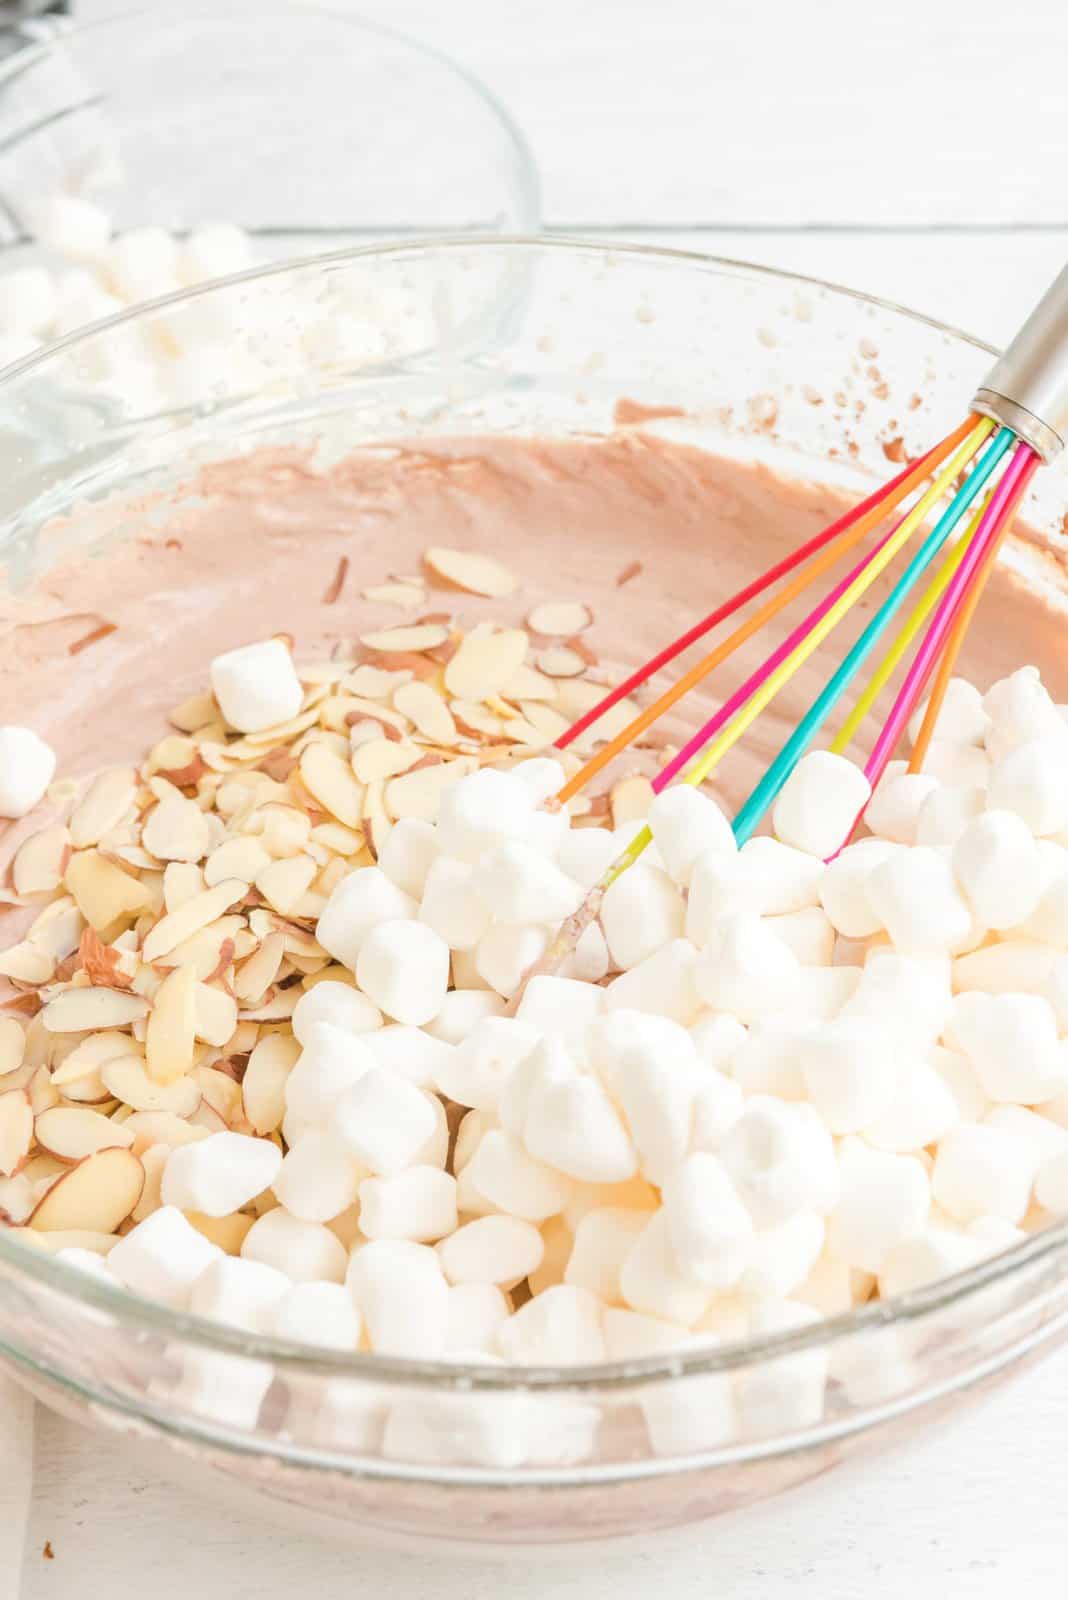 Mini marshmallows and almonds added to the ice cream mixture in bowl.